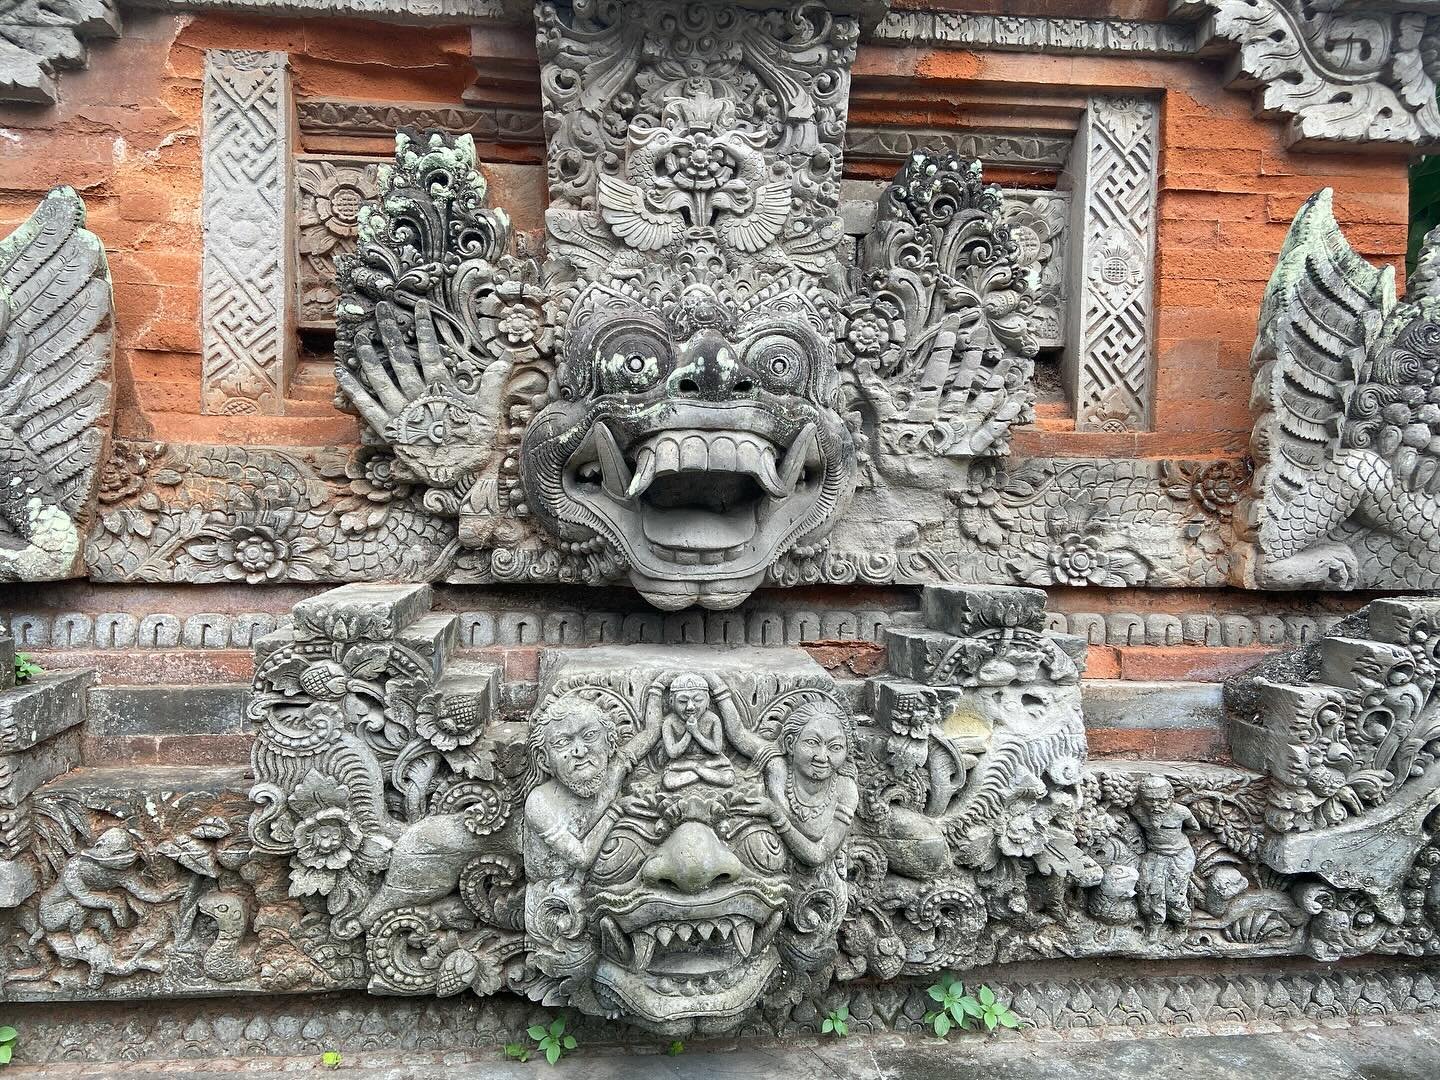 The Barong. In Bali the Barong is everywhere. It&rsquo;s a sign of Good Fortune, righteousness and justice. A mythical creature that often looks to me like a large dog during performances with its very distinct movements. The Barong fights evil. And 